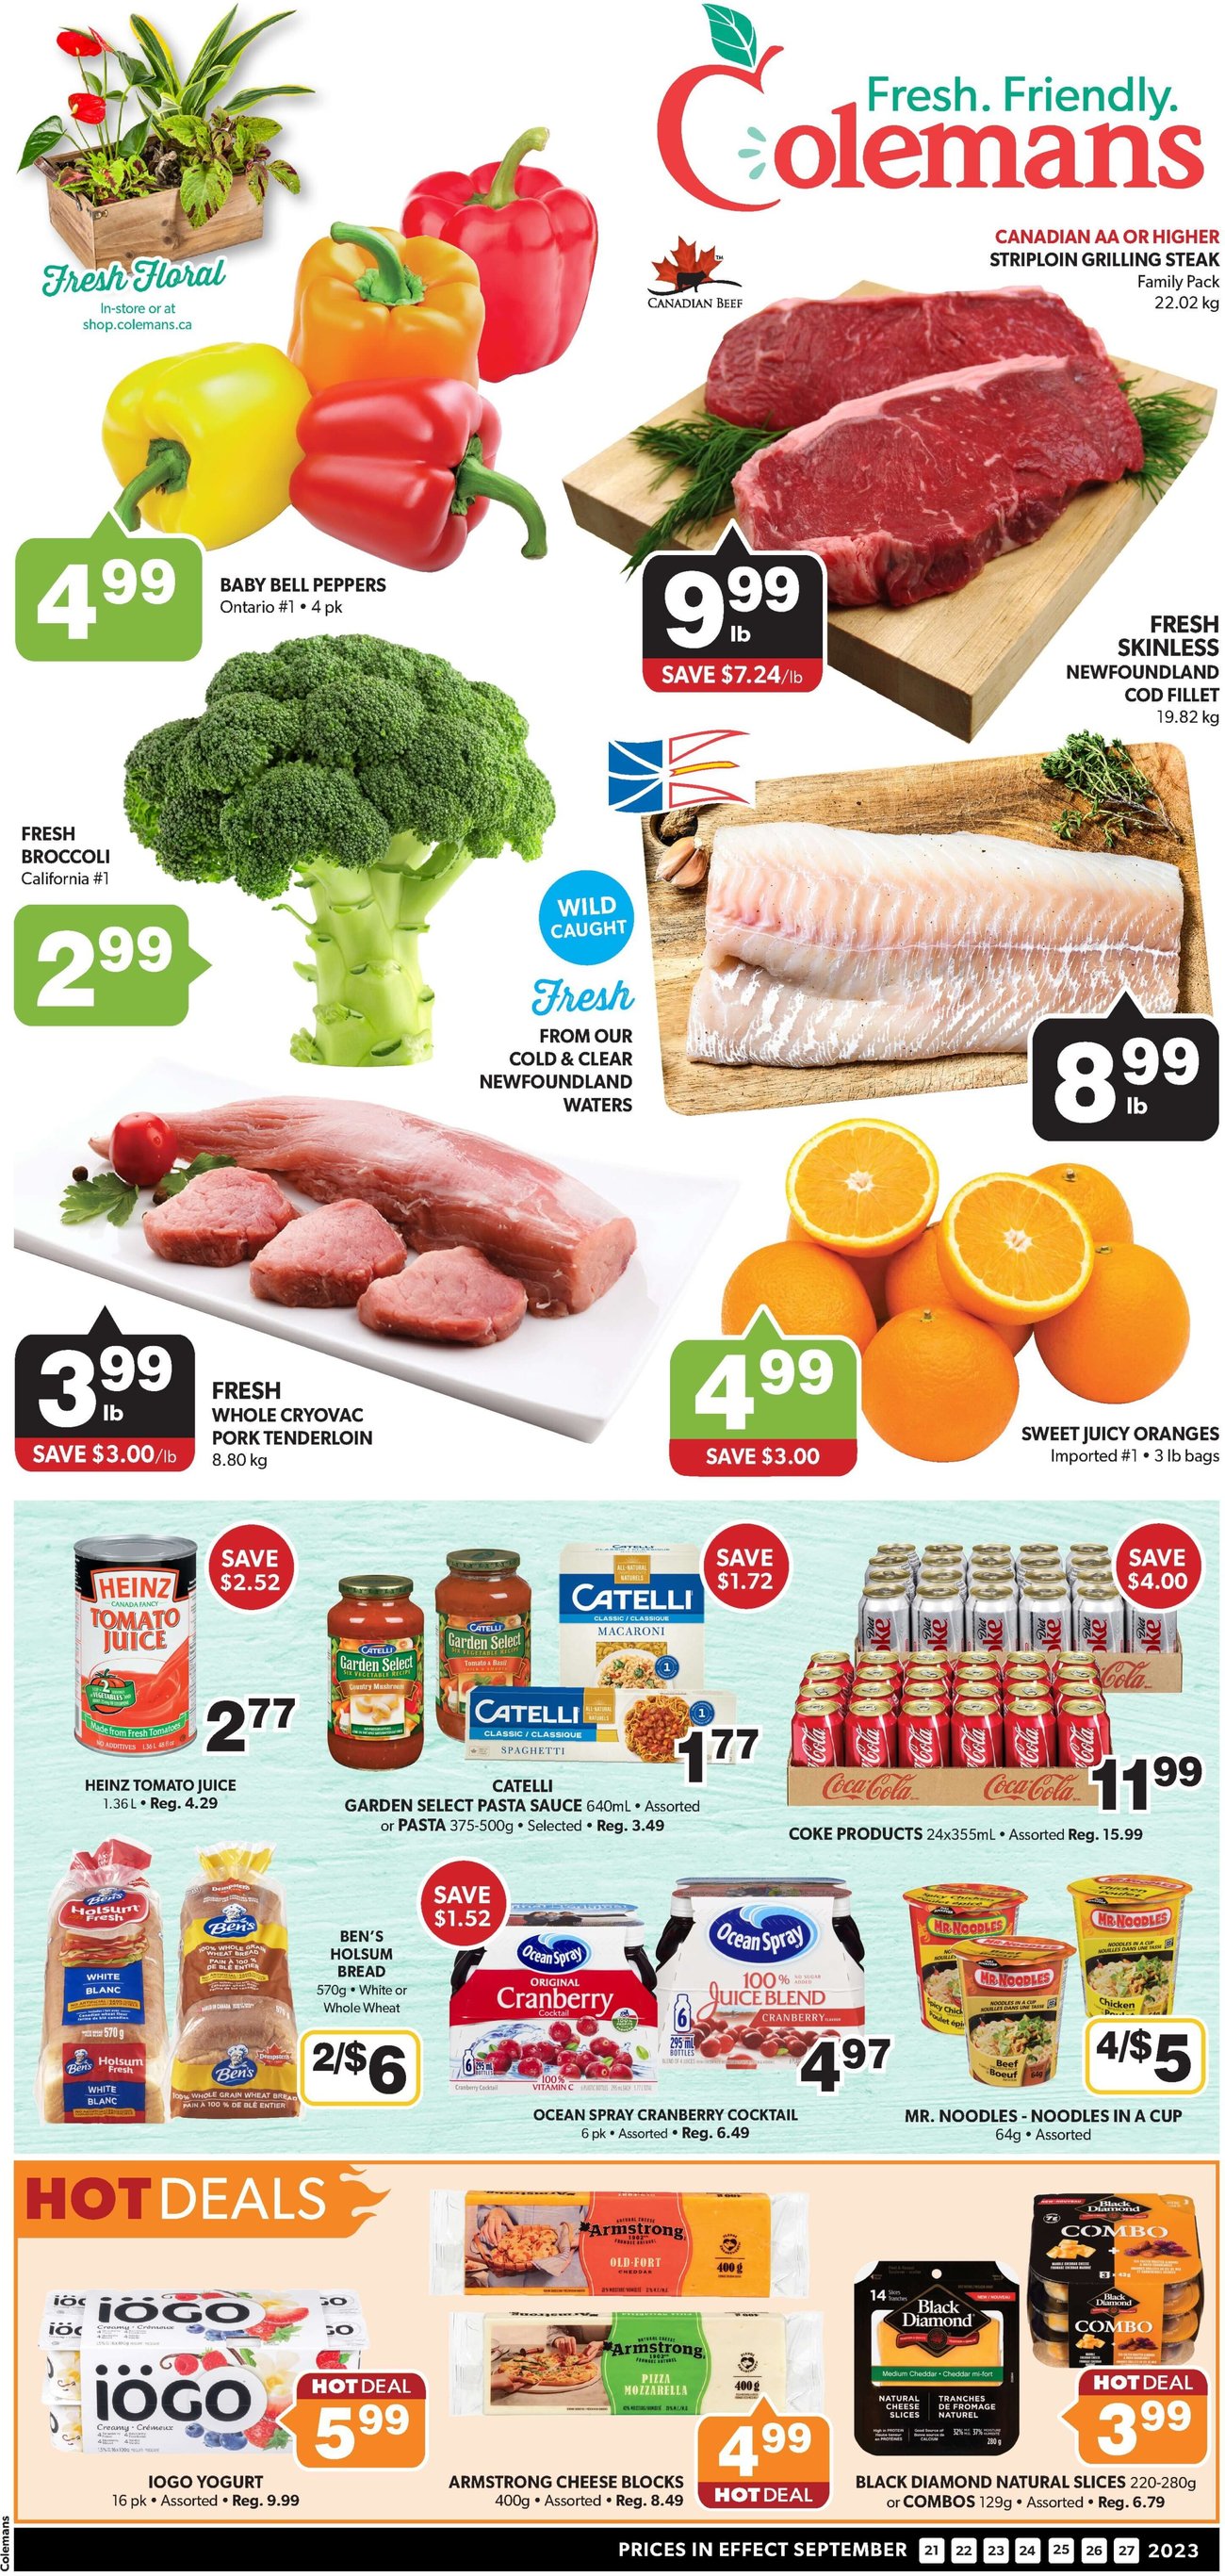 Colemans - Weekly Flyer Specials - Page 1